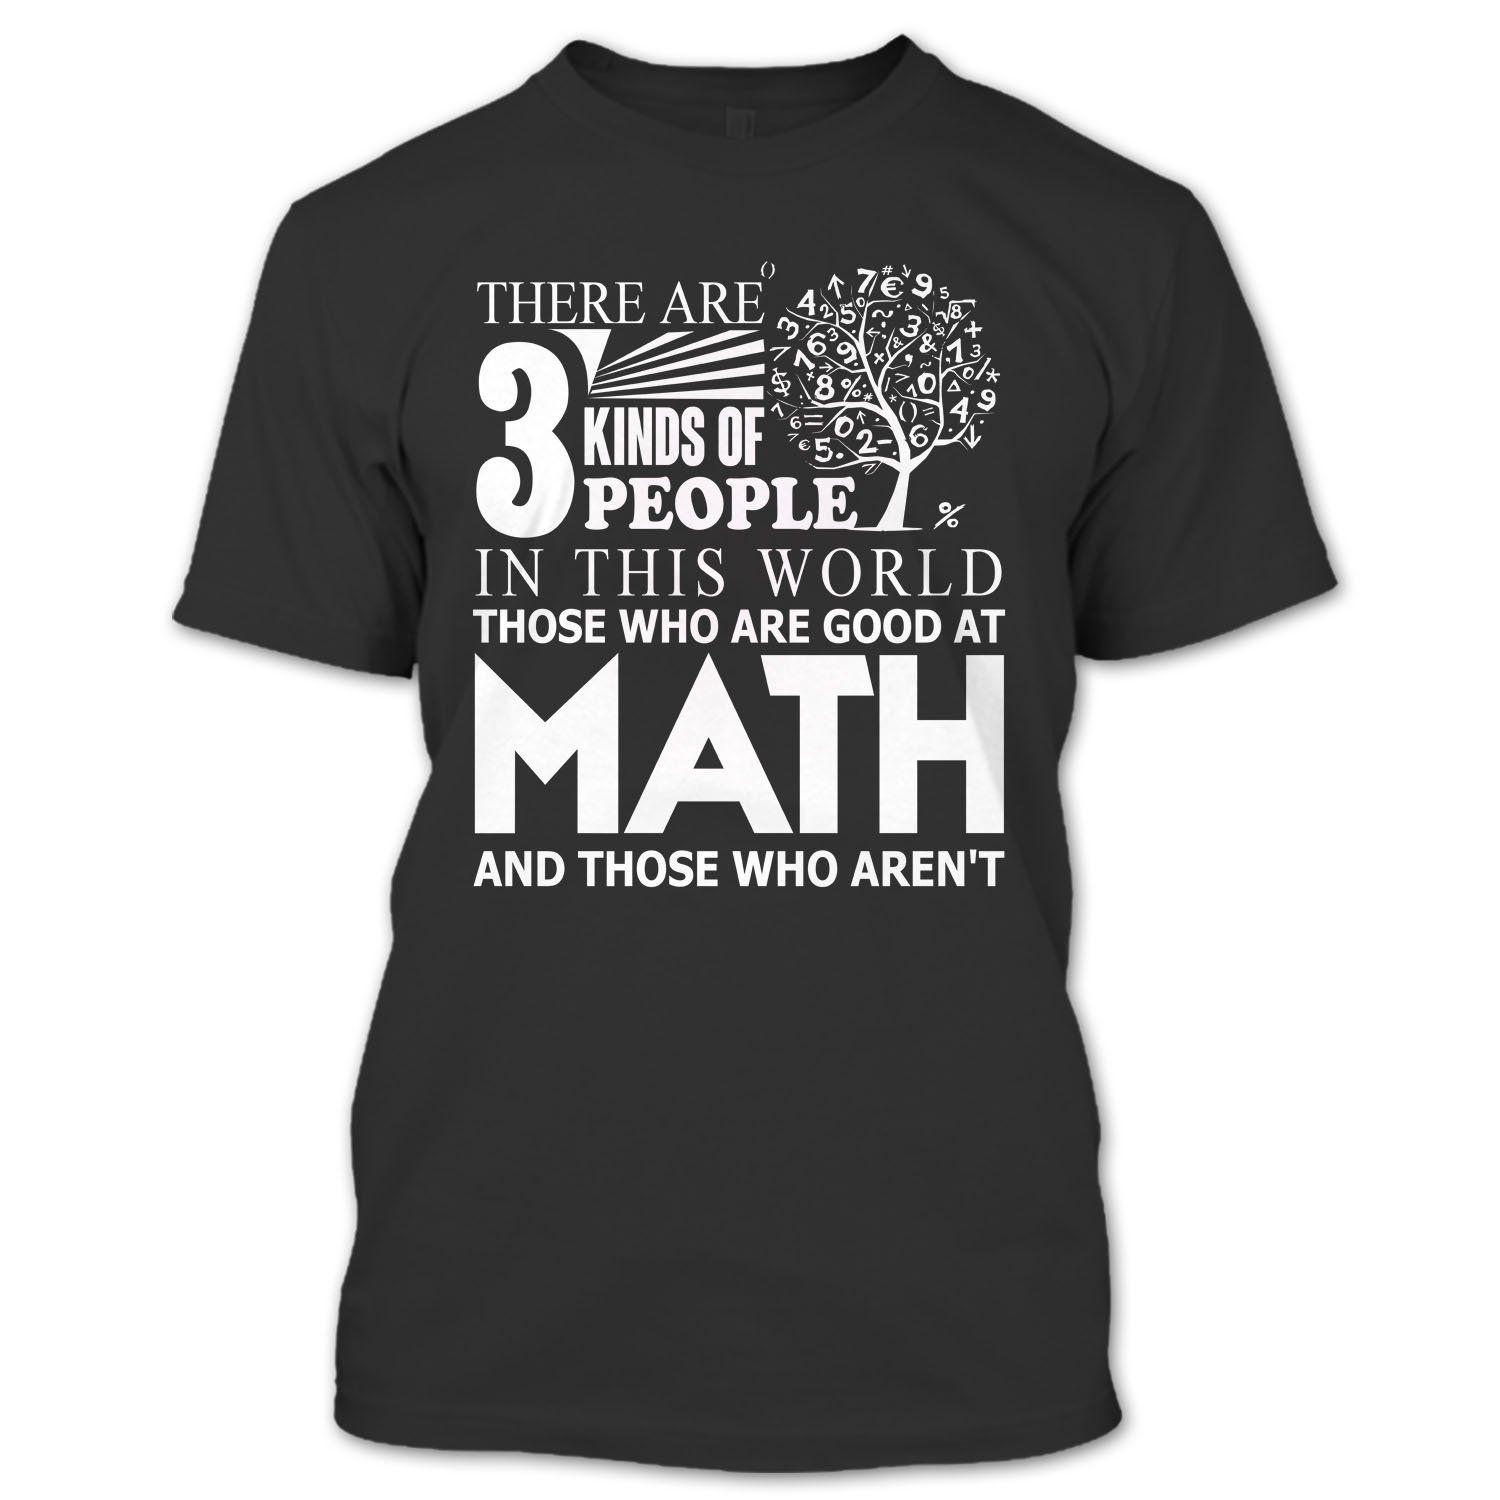 Awesome Math Logo - There Are 3 Kinds Of People T Shirt, Coolest Math Lover T Shirt